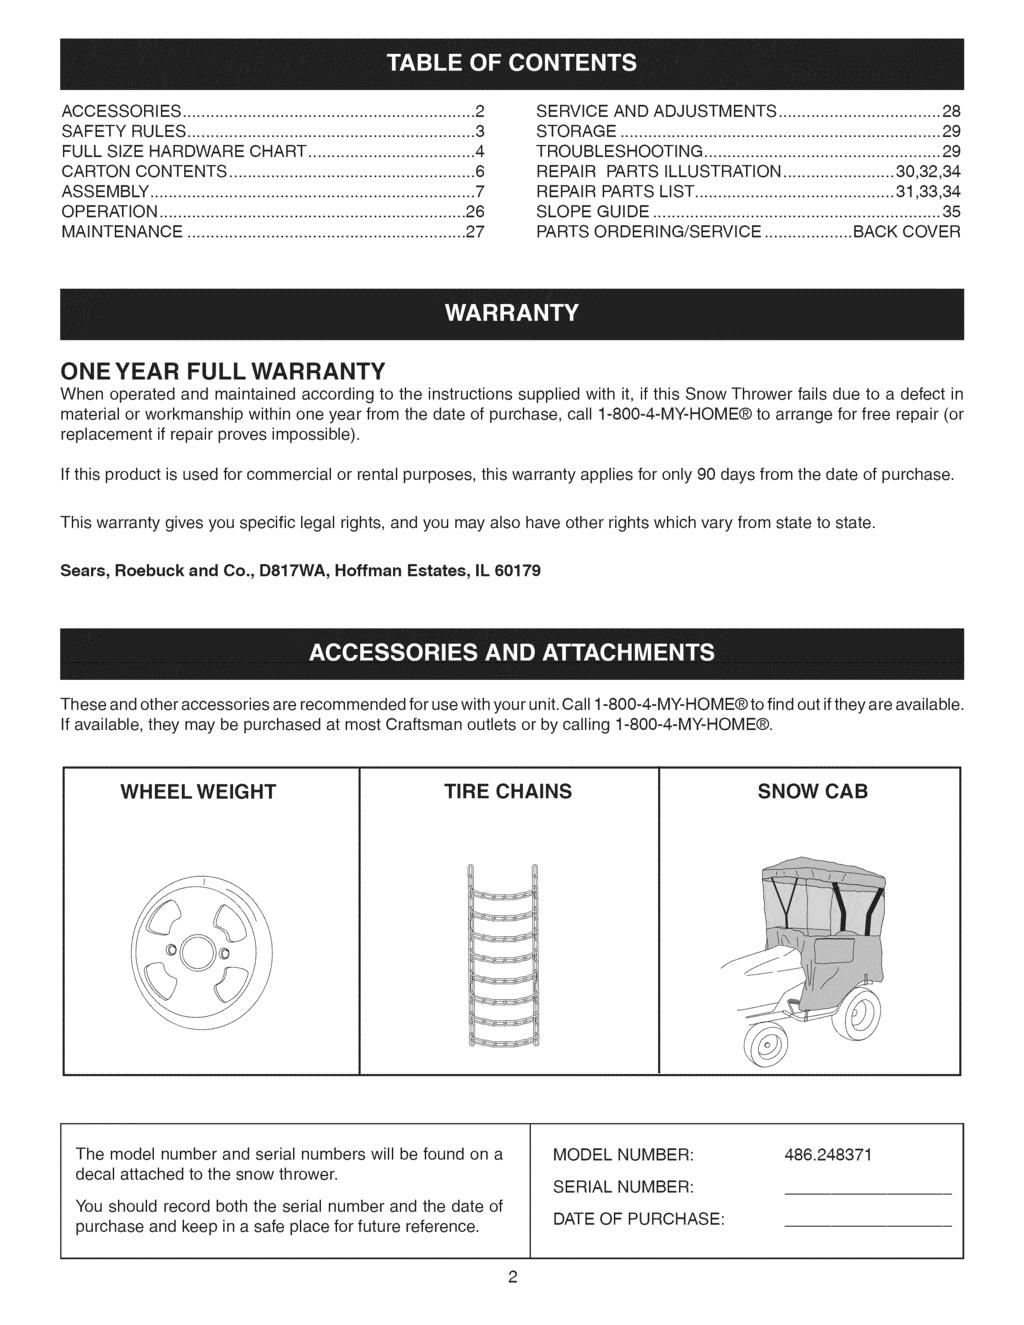 ACCESSORIES... 2 SAFETY RULES... 3 FULL SIZE HARDWARE CHART... 4 CARTON CONTENTS... 6 ASSEMBLY... 7 OPERATION... 26 MAINTENANCE... 27 SERVICE AND ADJUSTMENTS... 28 STORAGE... 29 TROUBLESHOOTING.